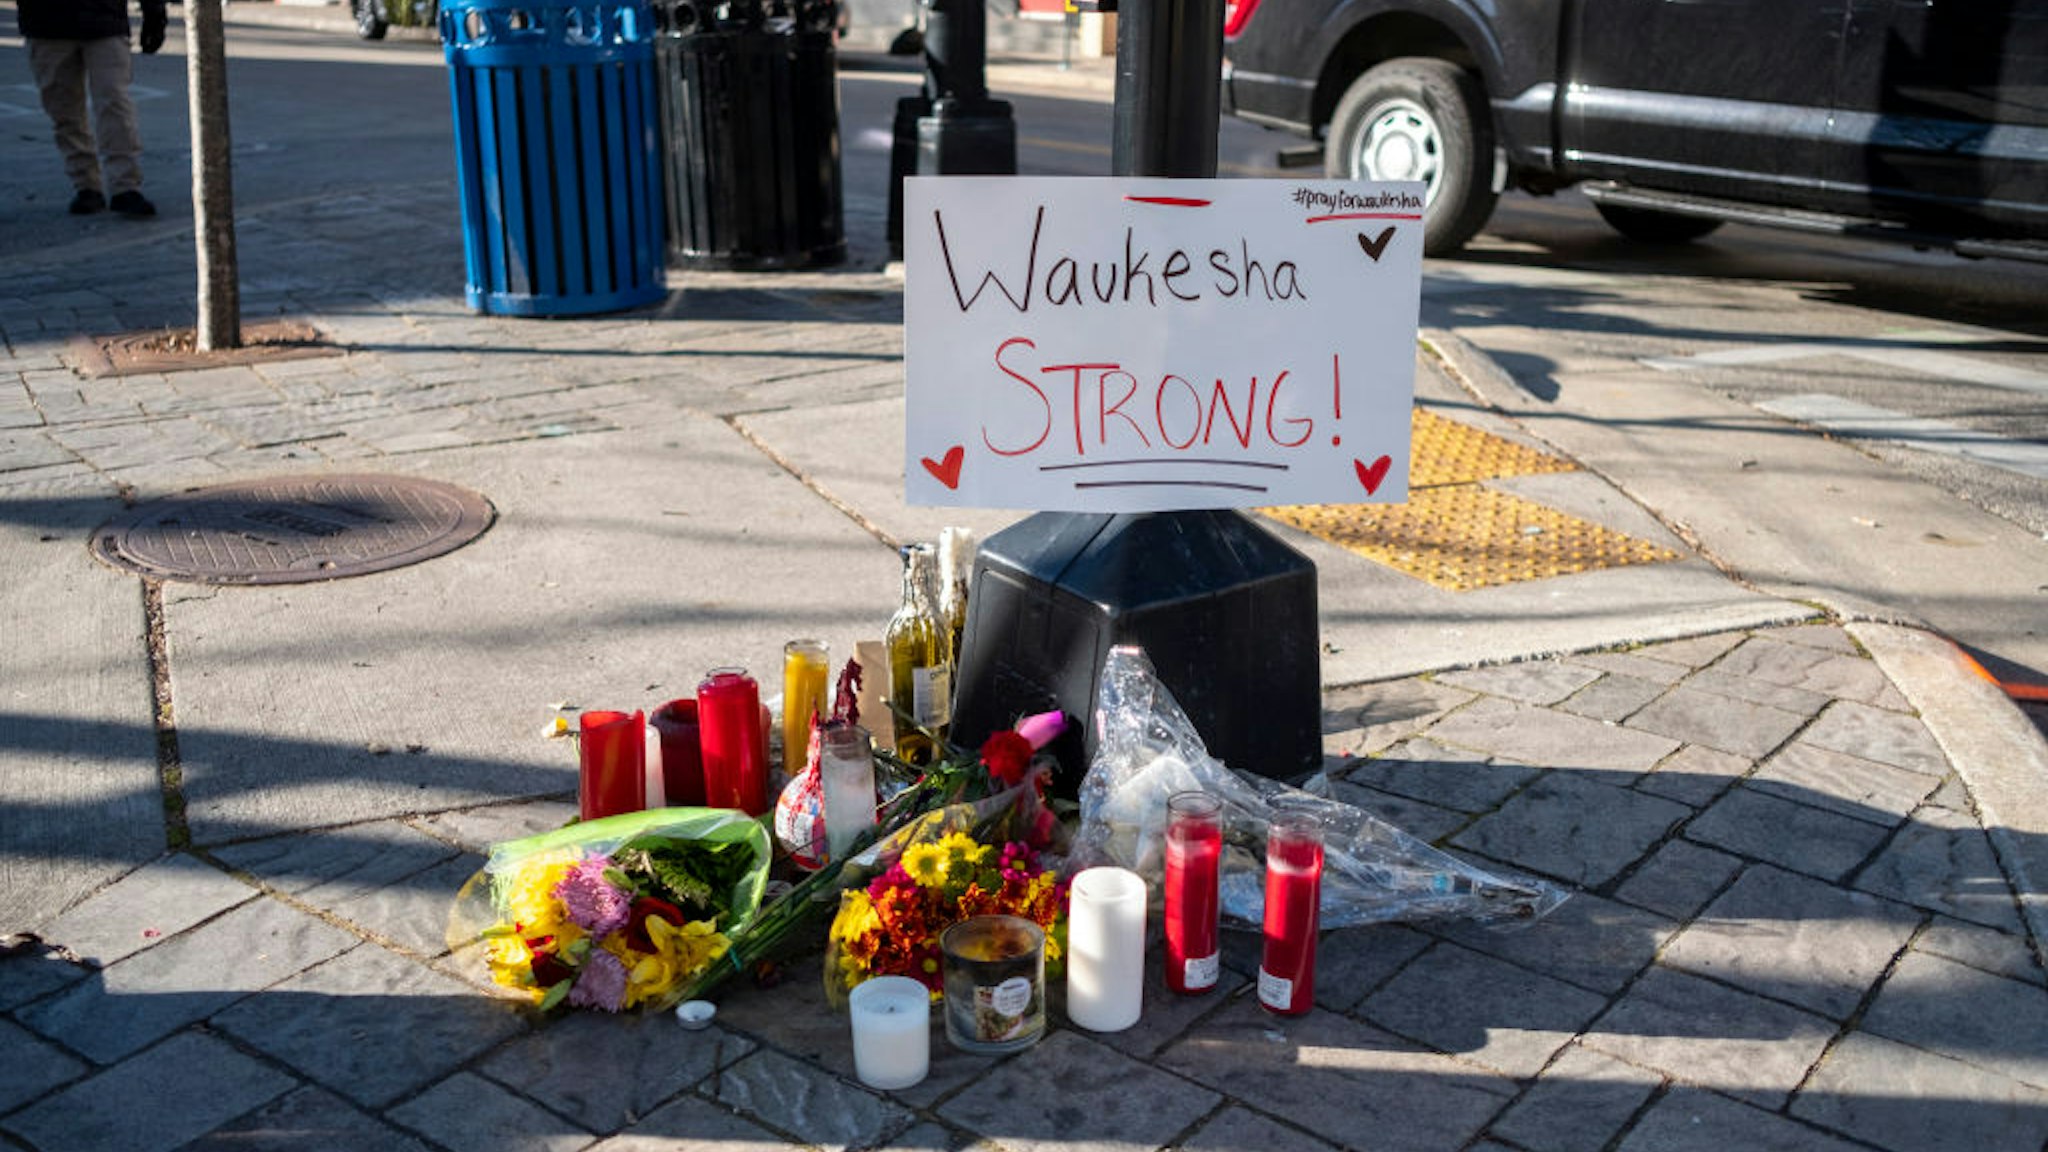 WAUKESHA, WI - NOVEMBER 23: Memorials placed along Main Street in downtown Waukesha Wisconsin left in areas where people were hit by a driver plowing into the Christmas parade on Main Street in downtown November 22, 2021 in Waukesha, Wisconsin. Five people were left dead after a person driving an S.U.V. entered the parade route and proceeded to strike dozens of people.